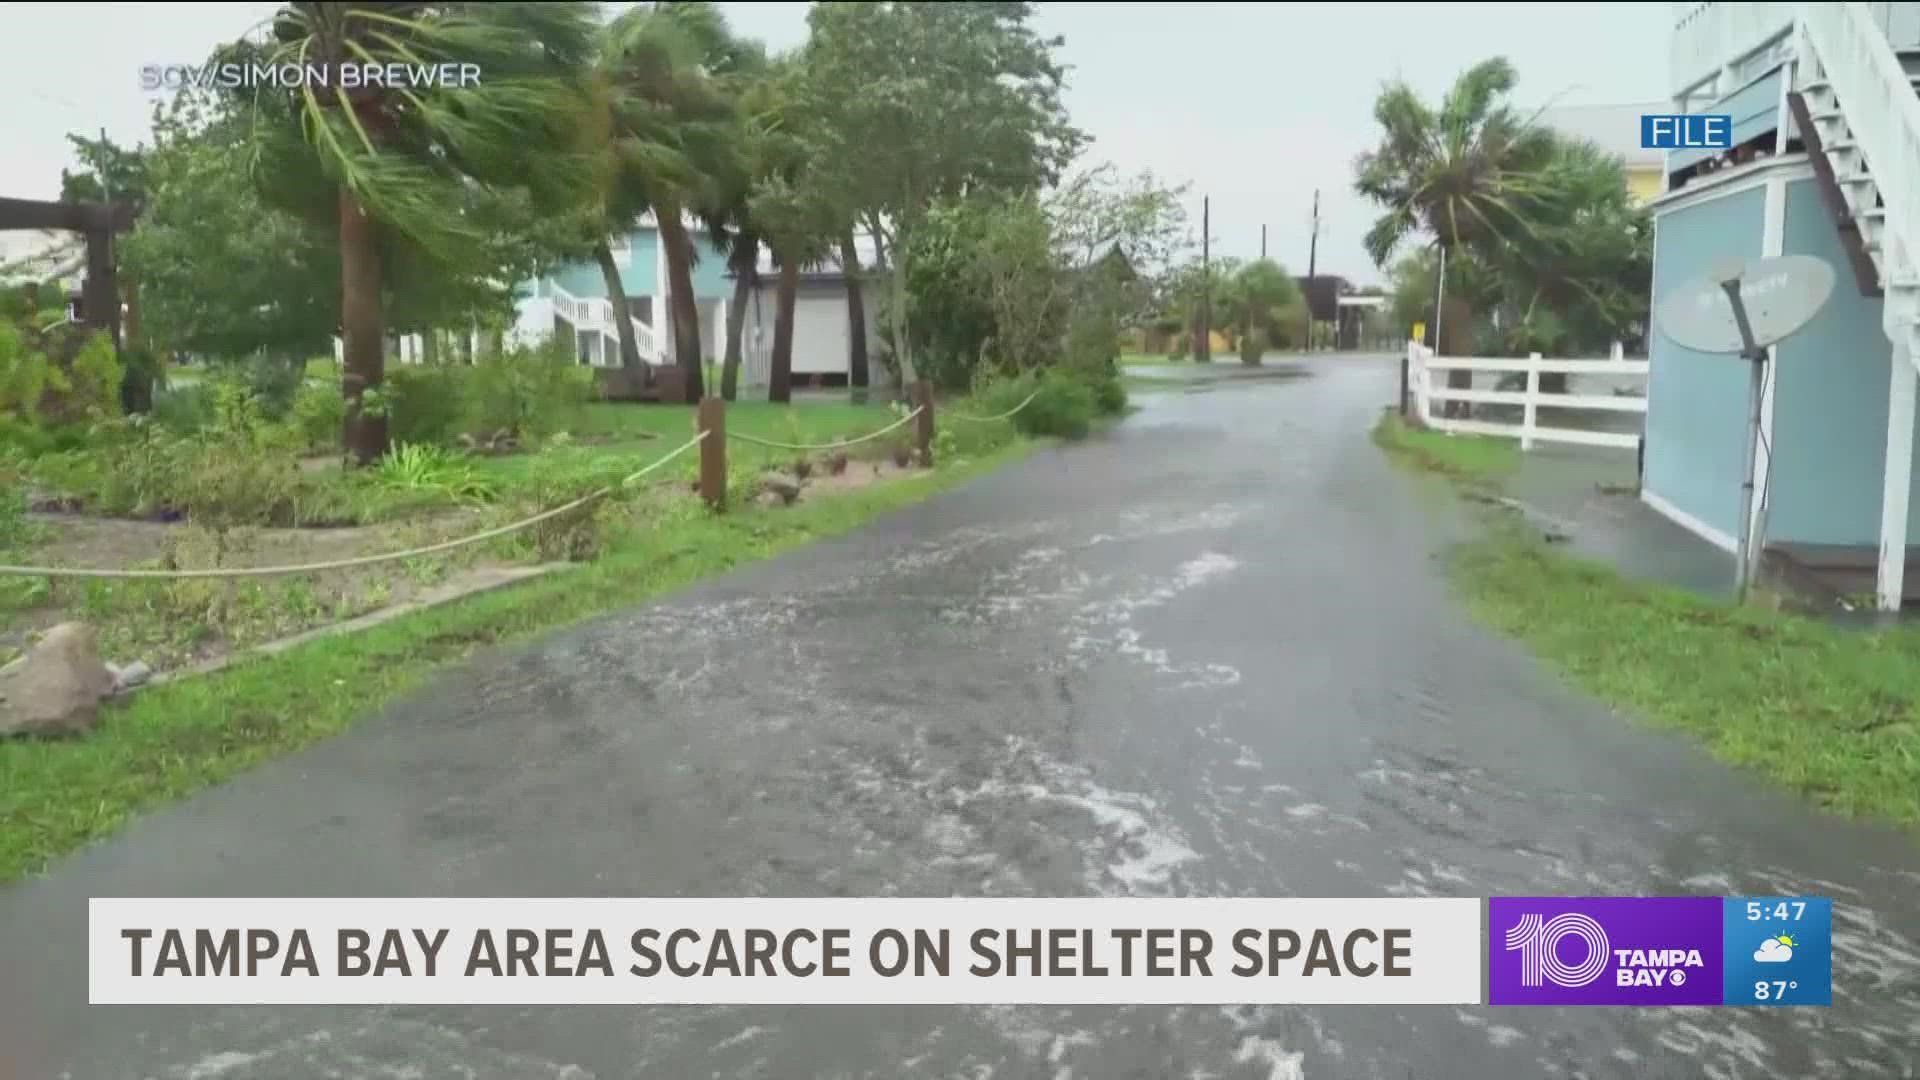 When it comes to sheltering during a storm, local leaders urge people to use hurricane shelters as a last resort since space is limited.